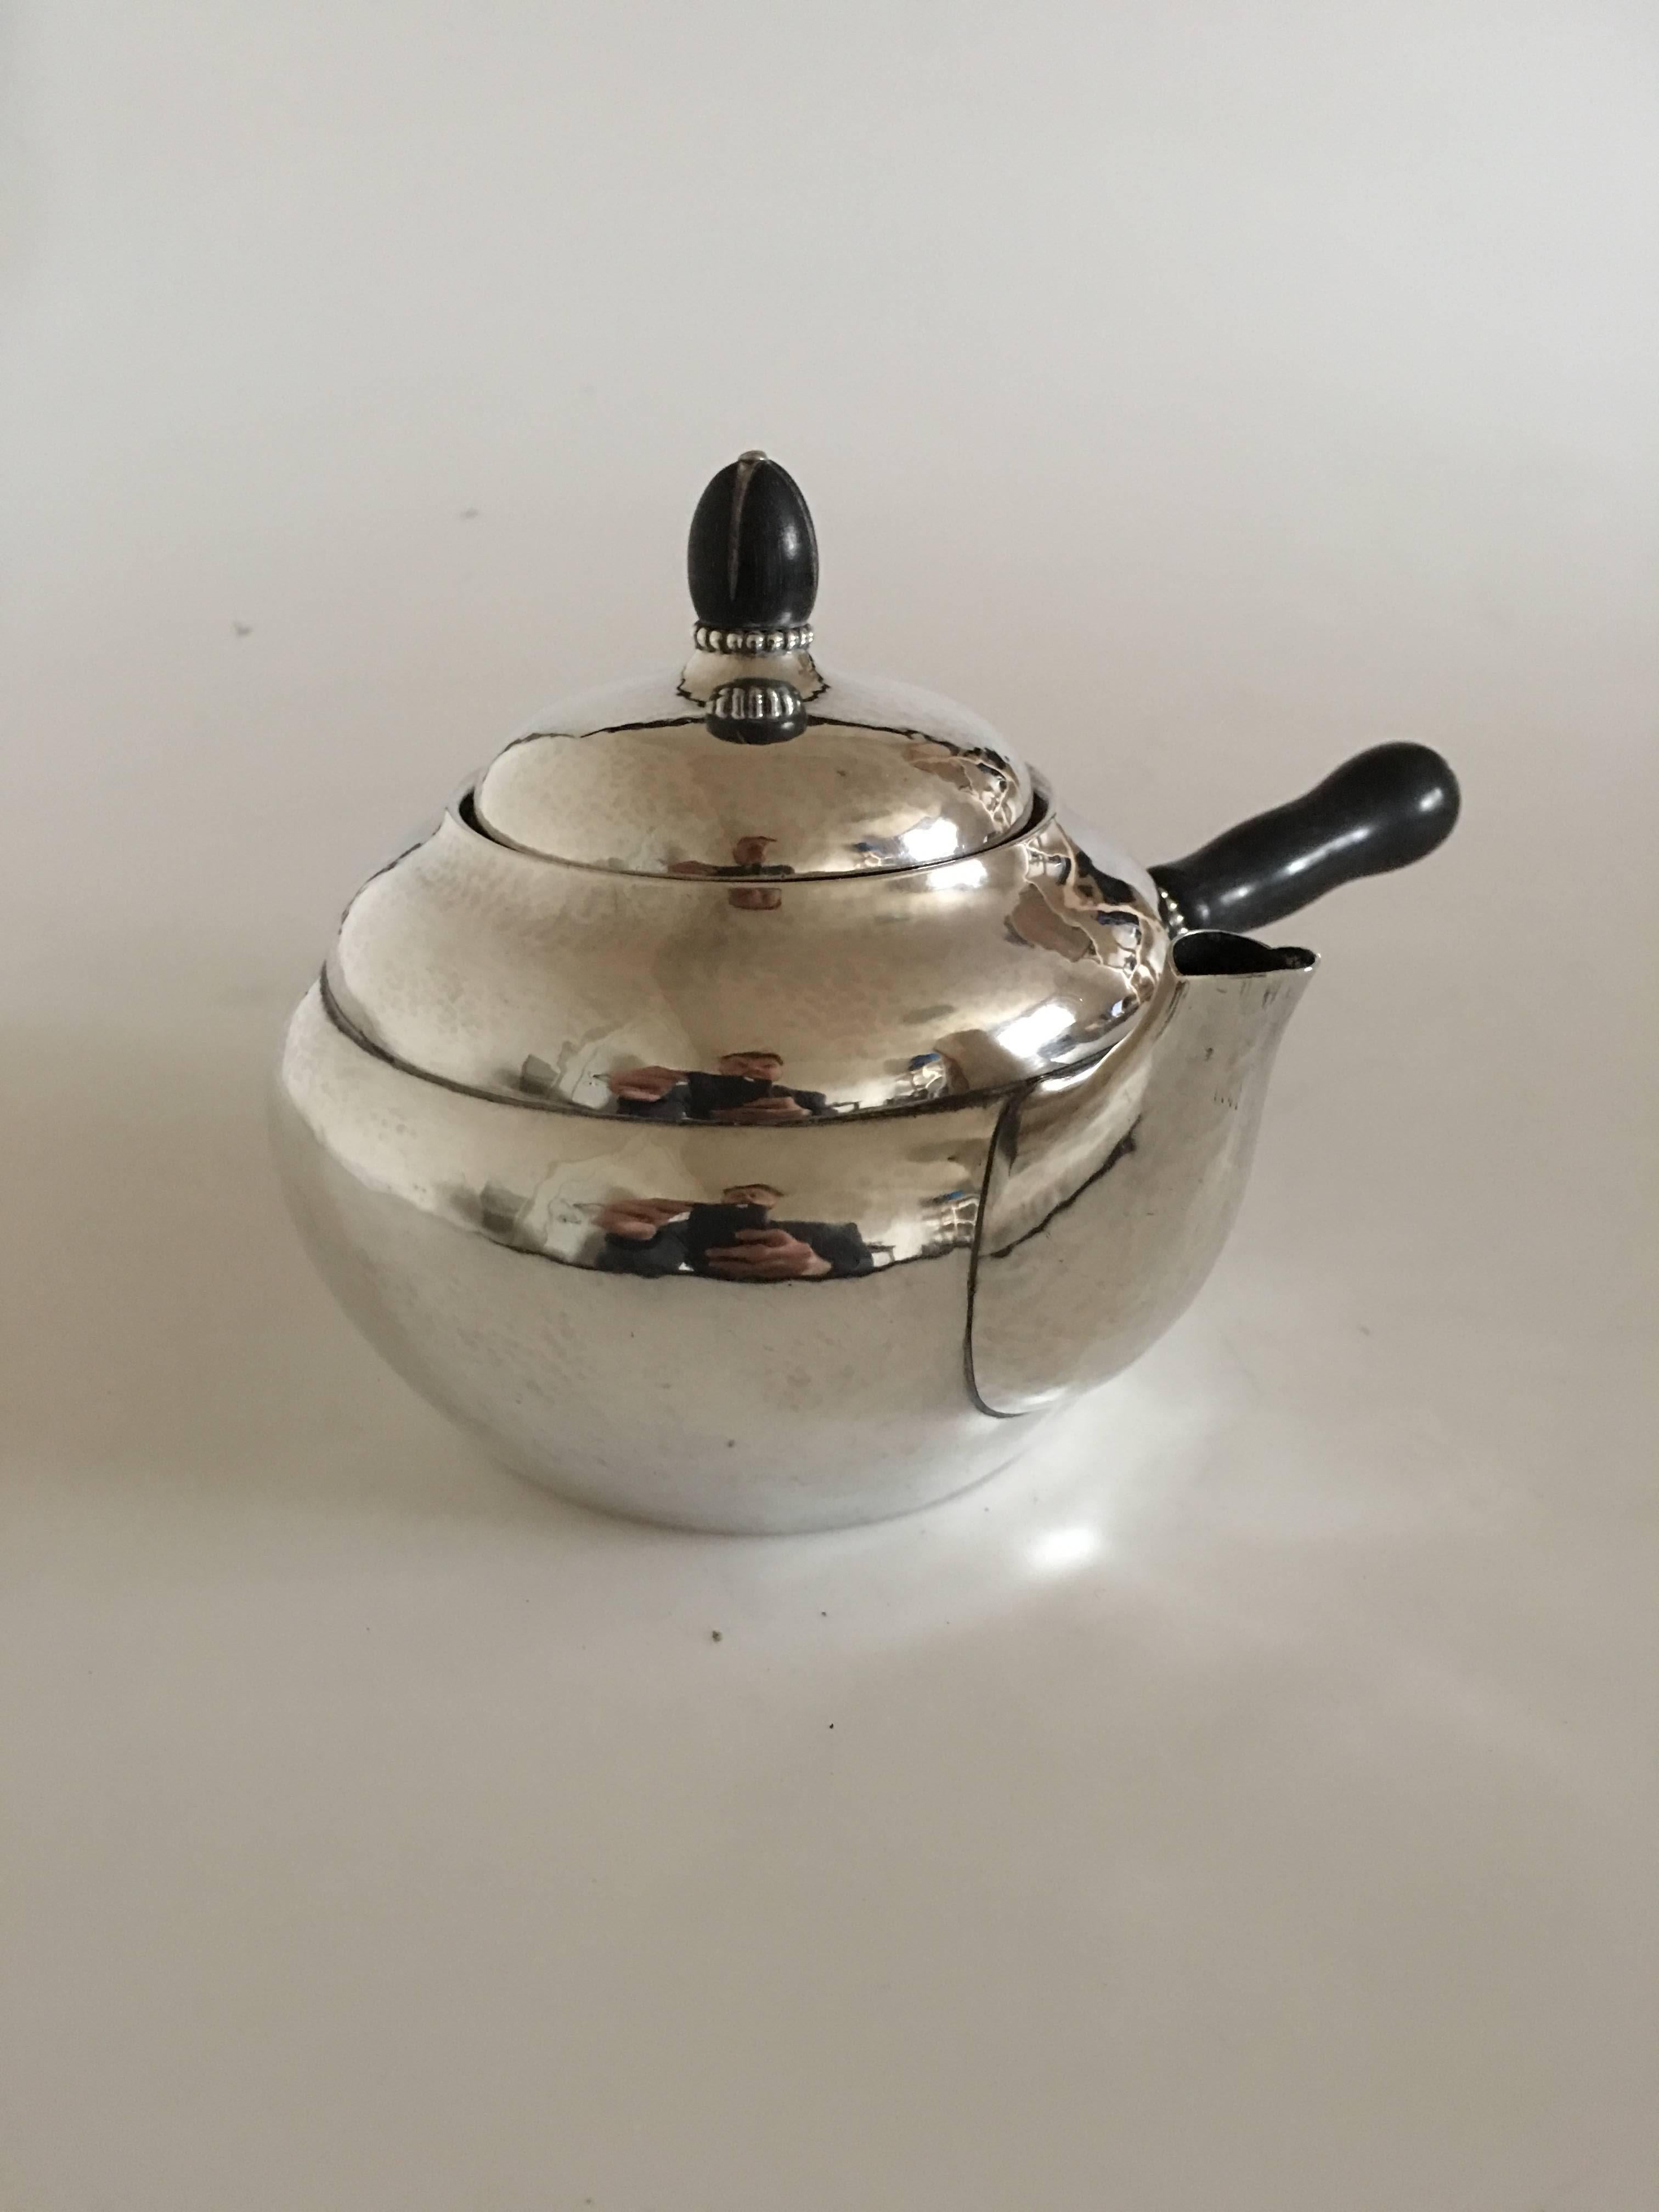 Georg Jensen sterling silver tea pot #1A with ebony, from 1915-1930. Measures 10 x 13.5 cm. Weighs 342 grams (12 oz).